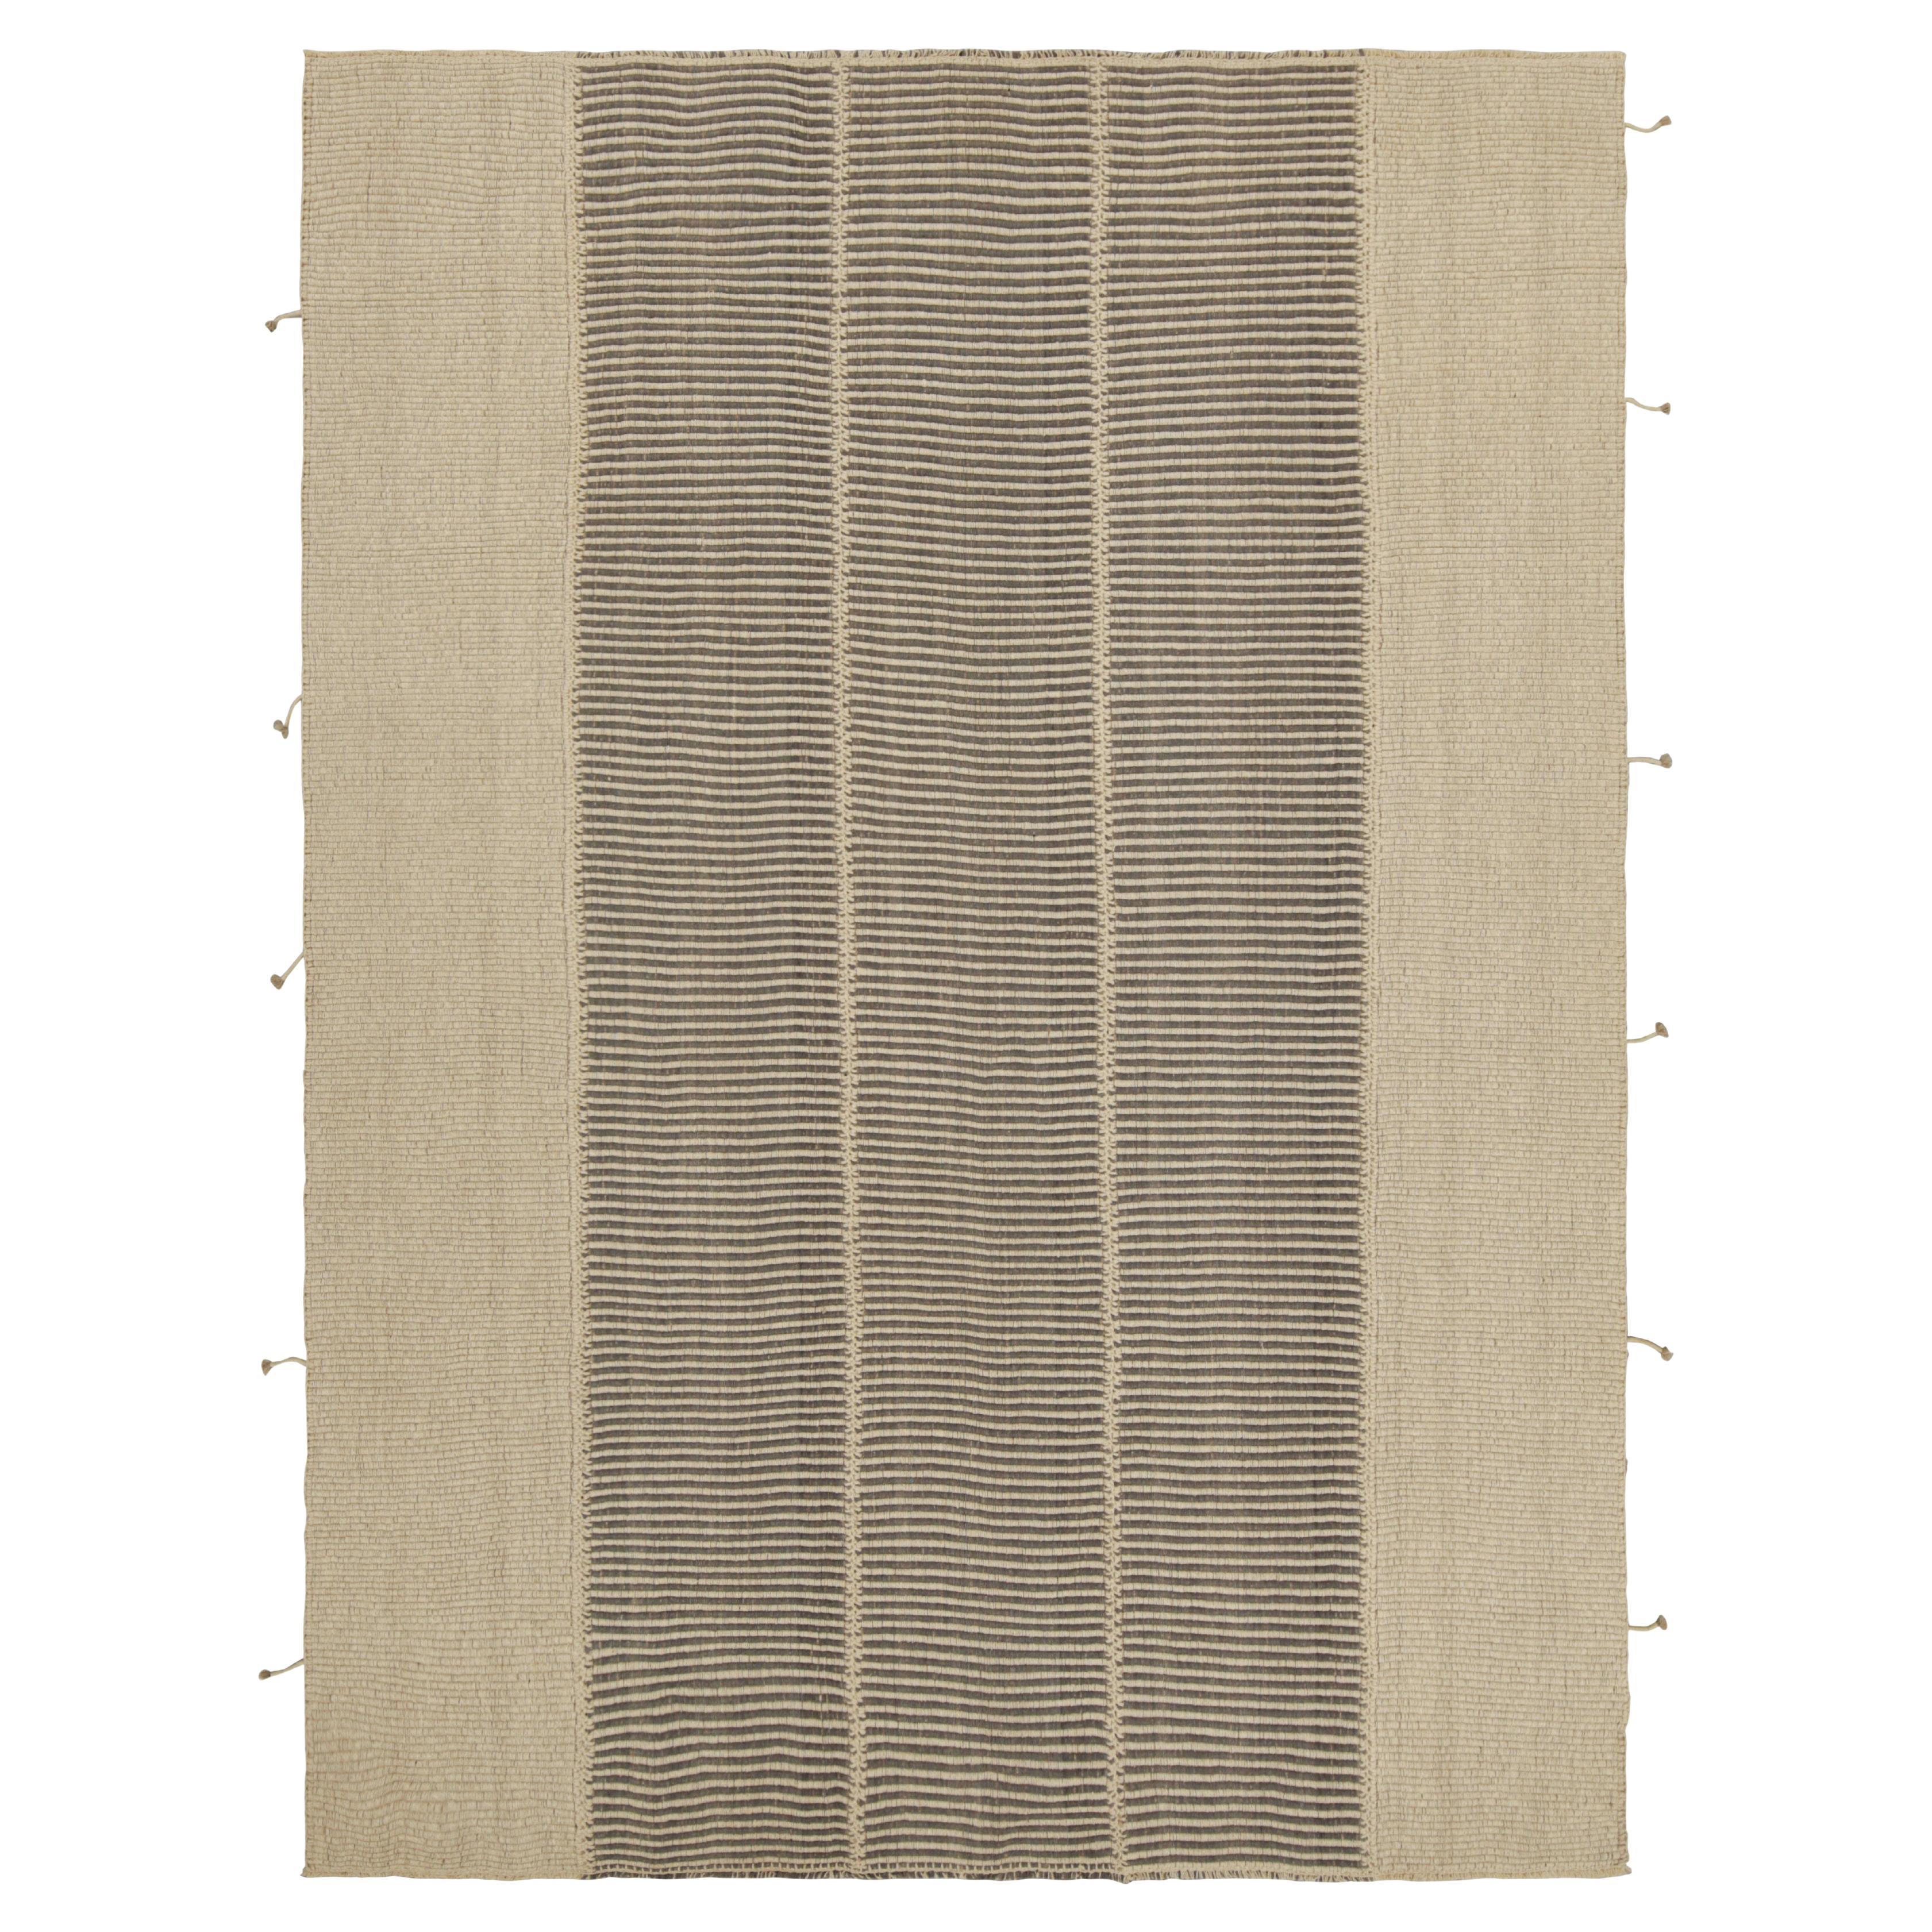 Rug & Kilim’s Contemporary Kilim in Beige and Black Textural Stripes For Sale